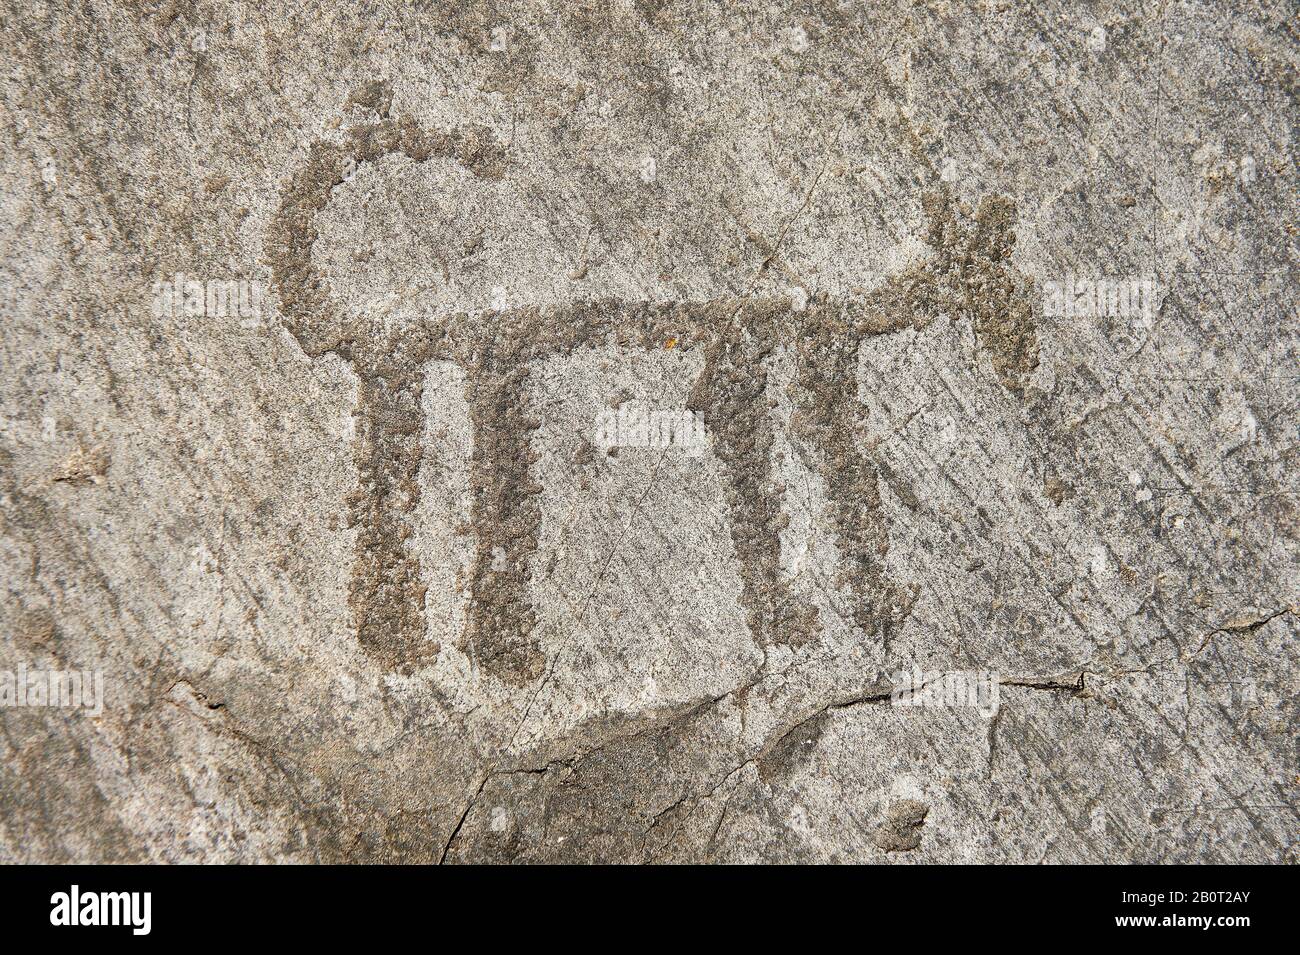 Petroglyph, rock carving, of a schematic dog. Carved by the ancient Camunni people in the copper age between 3200-2200 BC. Rock no 29, Foppi di Nadro, Stock Photo